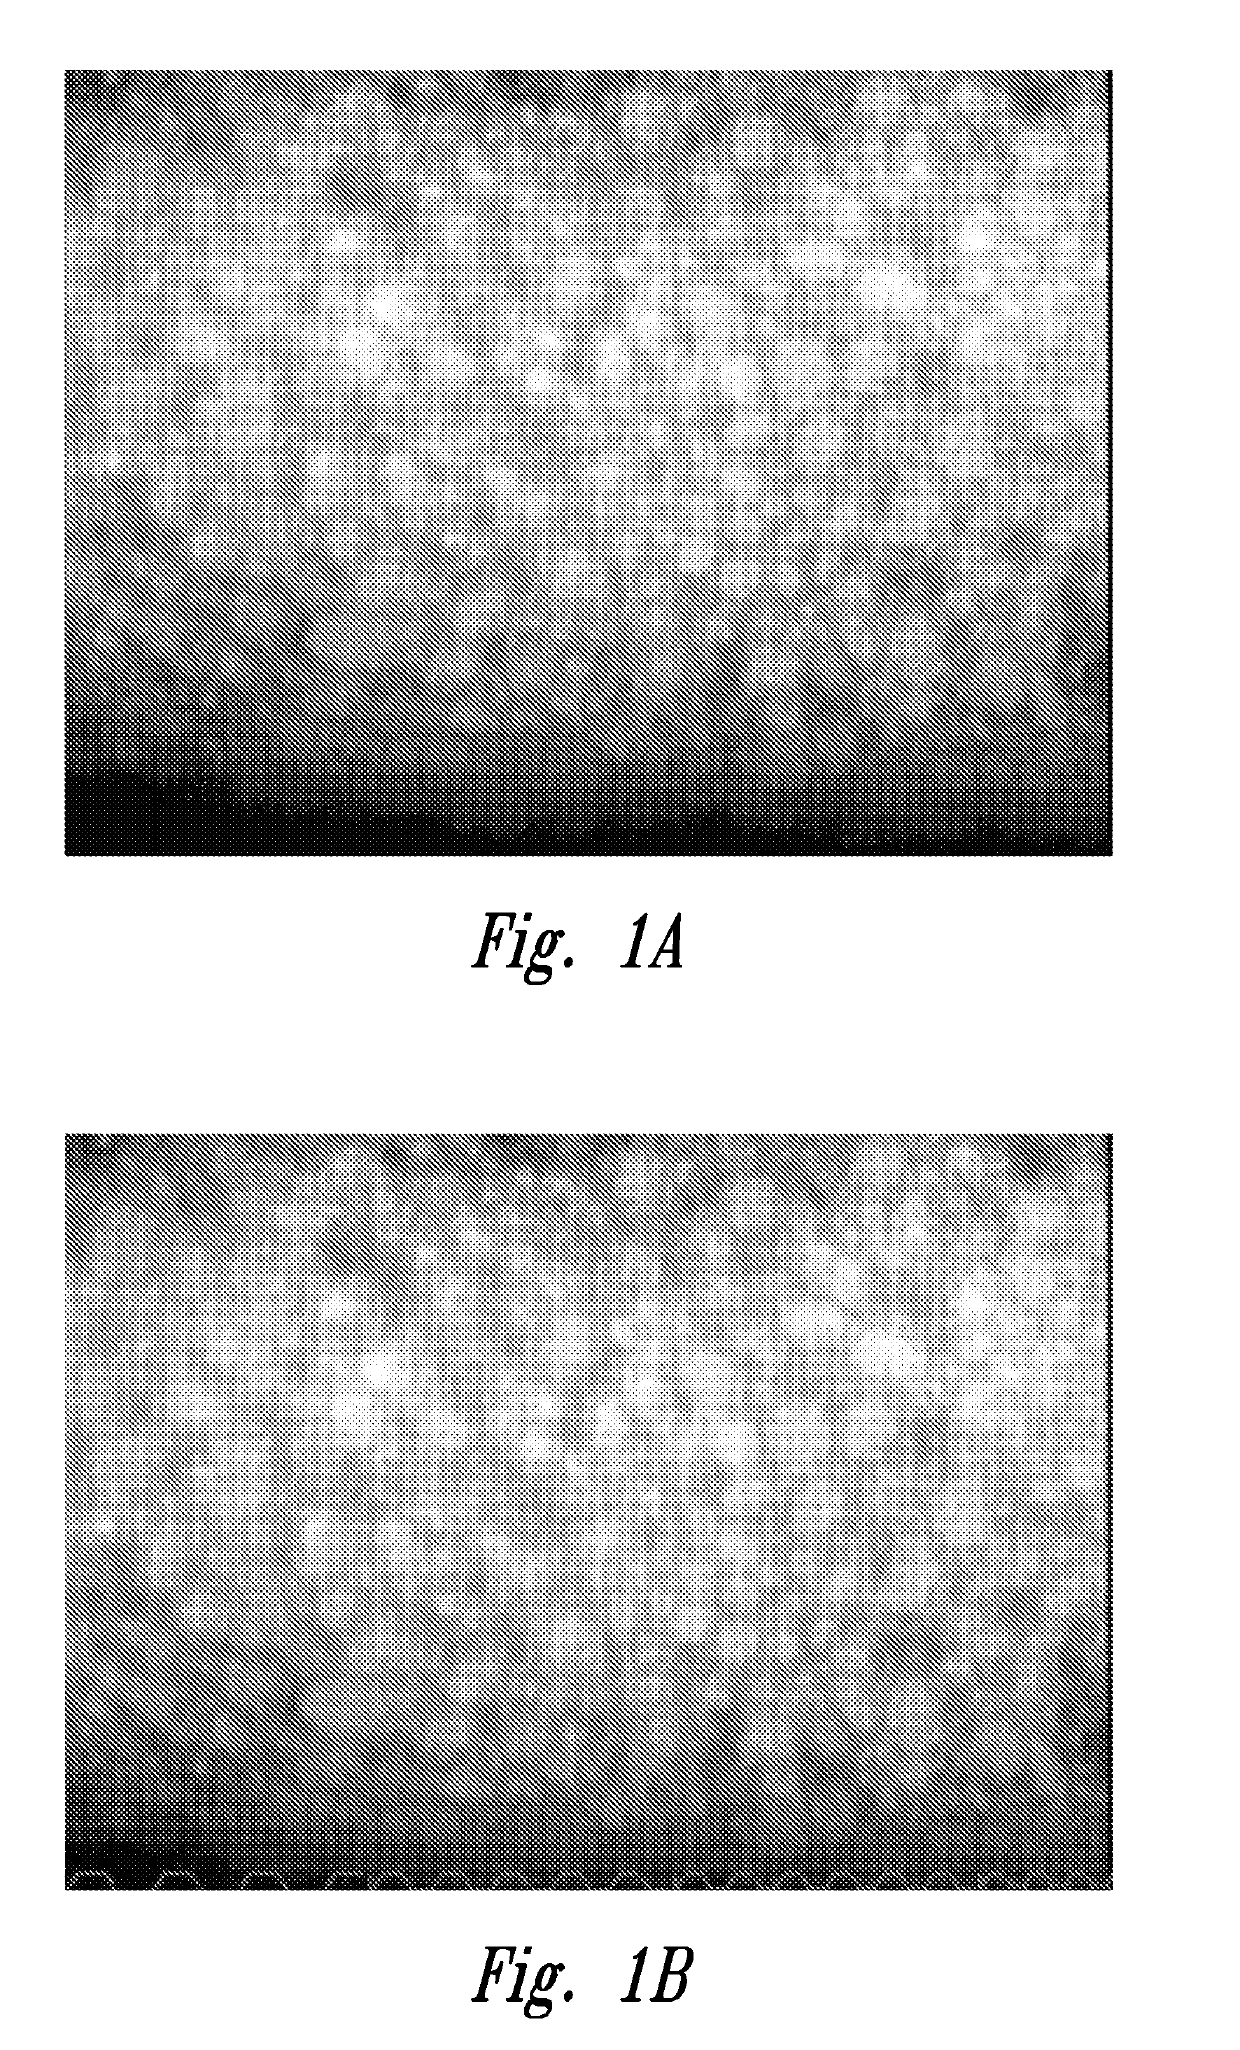 Method for assessing corneal tissue quality and endothelial cell density and morphology